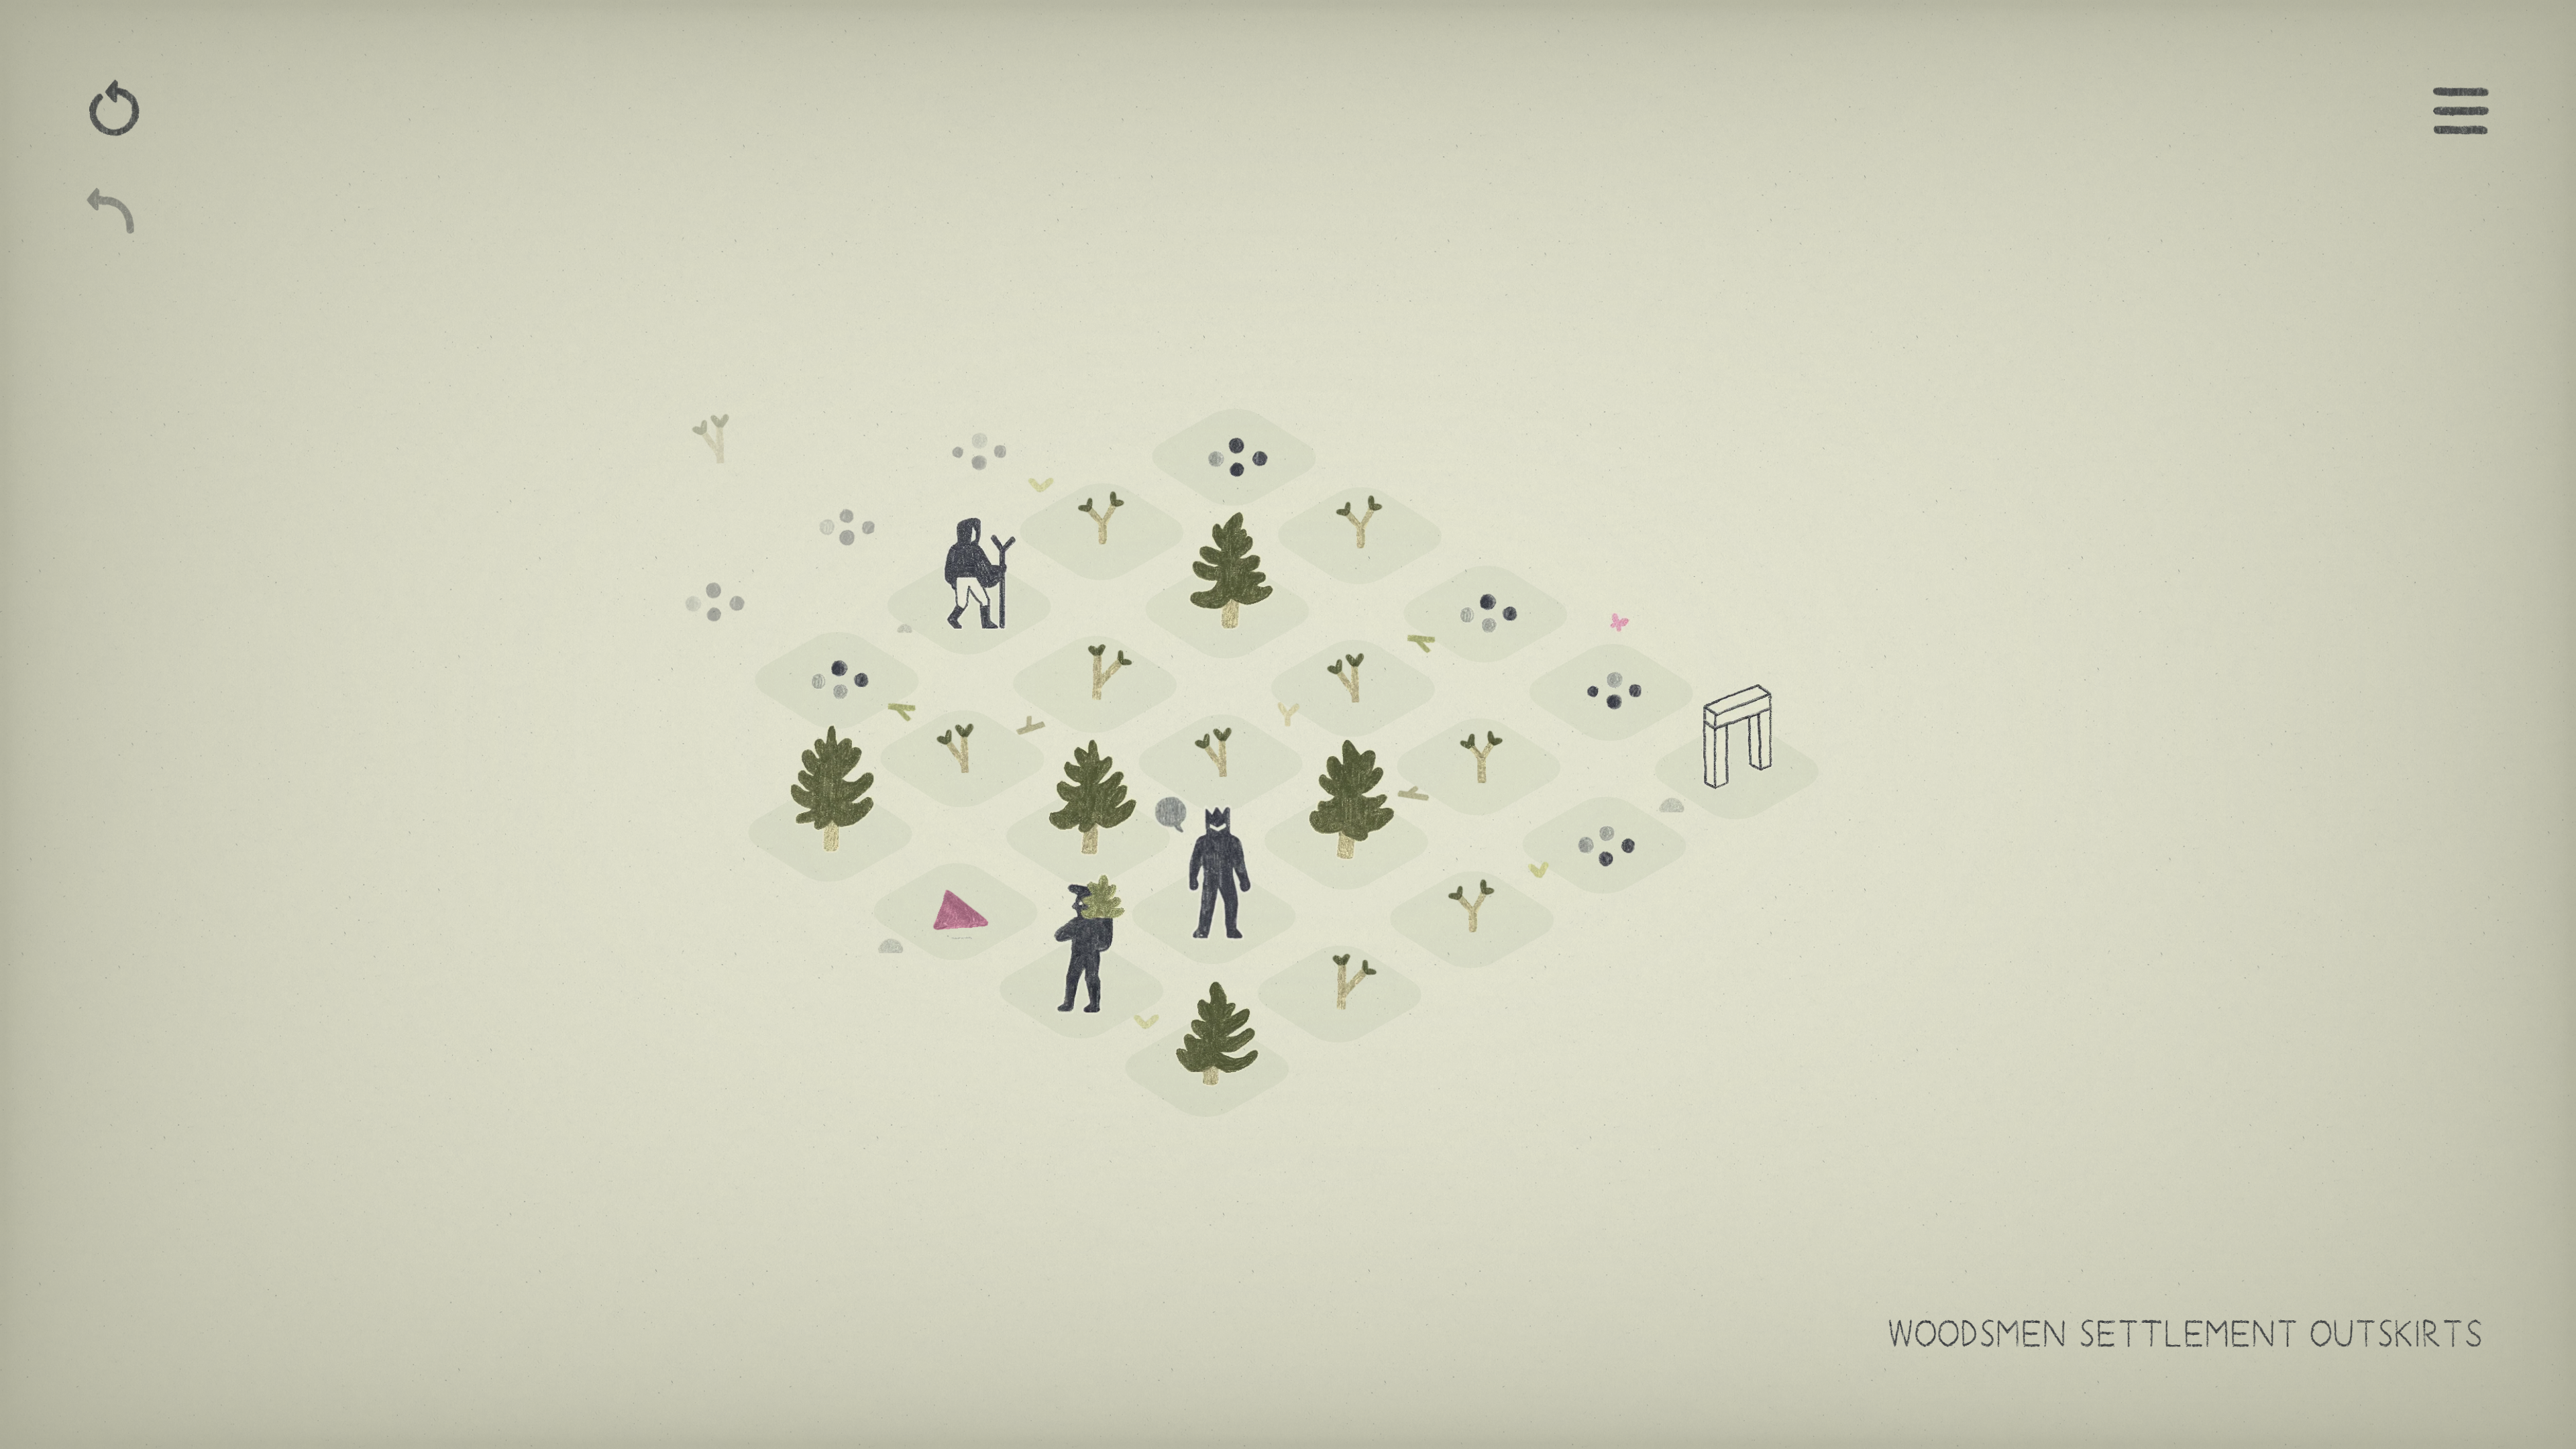 Game screenshot showing a small isometric grid, with characters, trees, and plants occupying the squares.